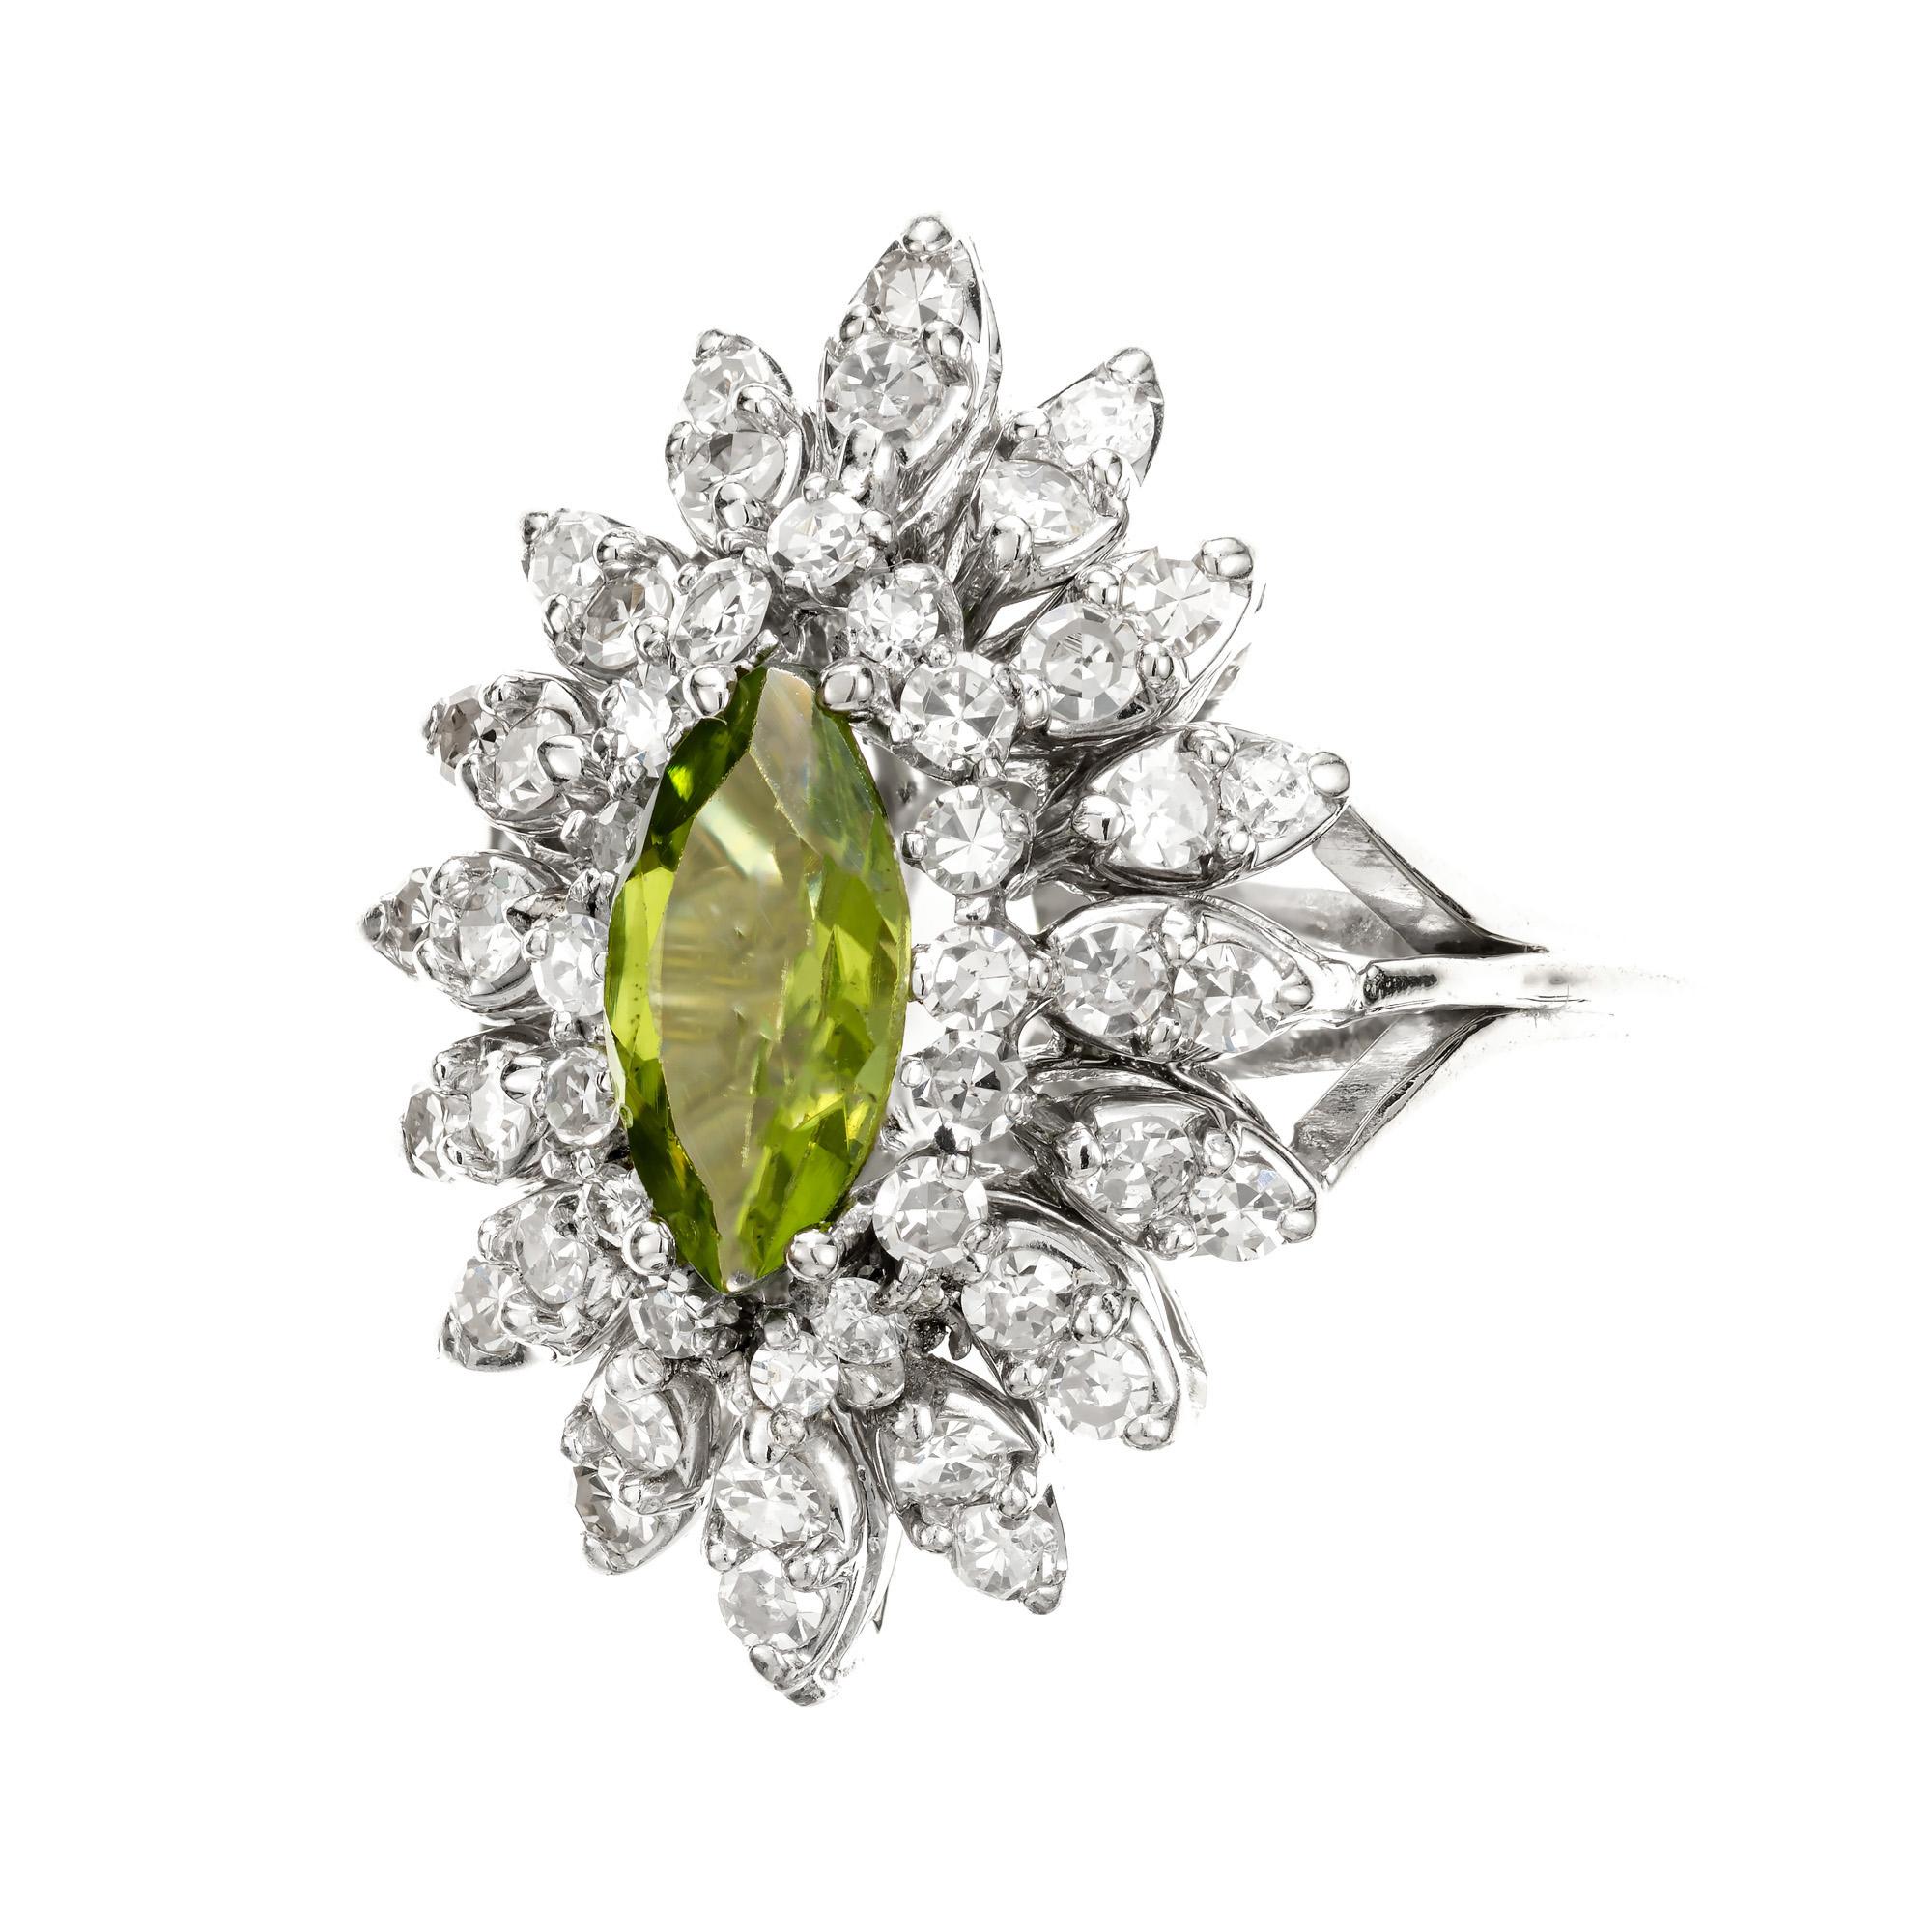 1960’s Mid-Century Peridot and diamond cluster ring. 1.00ct Marquise center stone, set in a 14k white gold cocktail setting with 3 tiers of 48 round single cut diamonds.

1 Marquise medium green Peridot, approx. total weight 1.00cts, VS
48 round